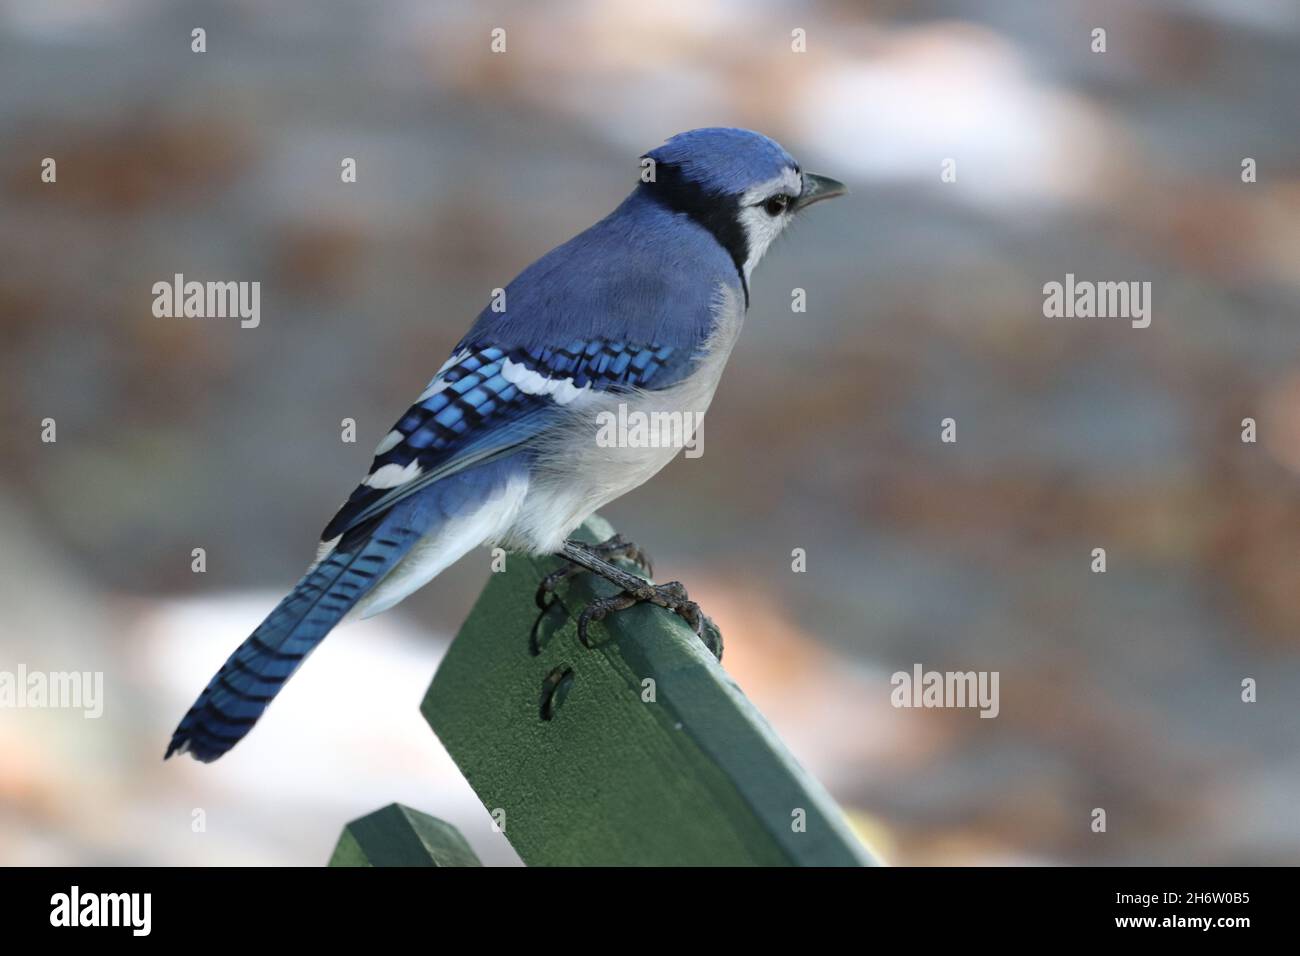 Closeup shot of a blue jay perched on the surface of a bench in Halifax, Germany Stock Photo